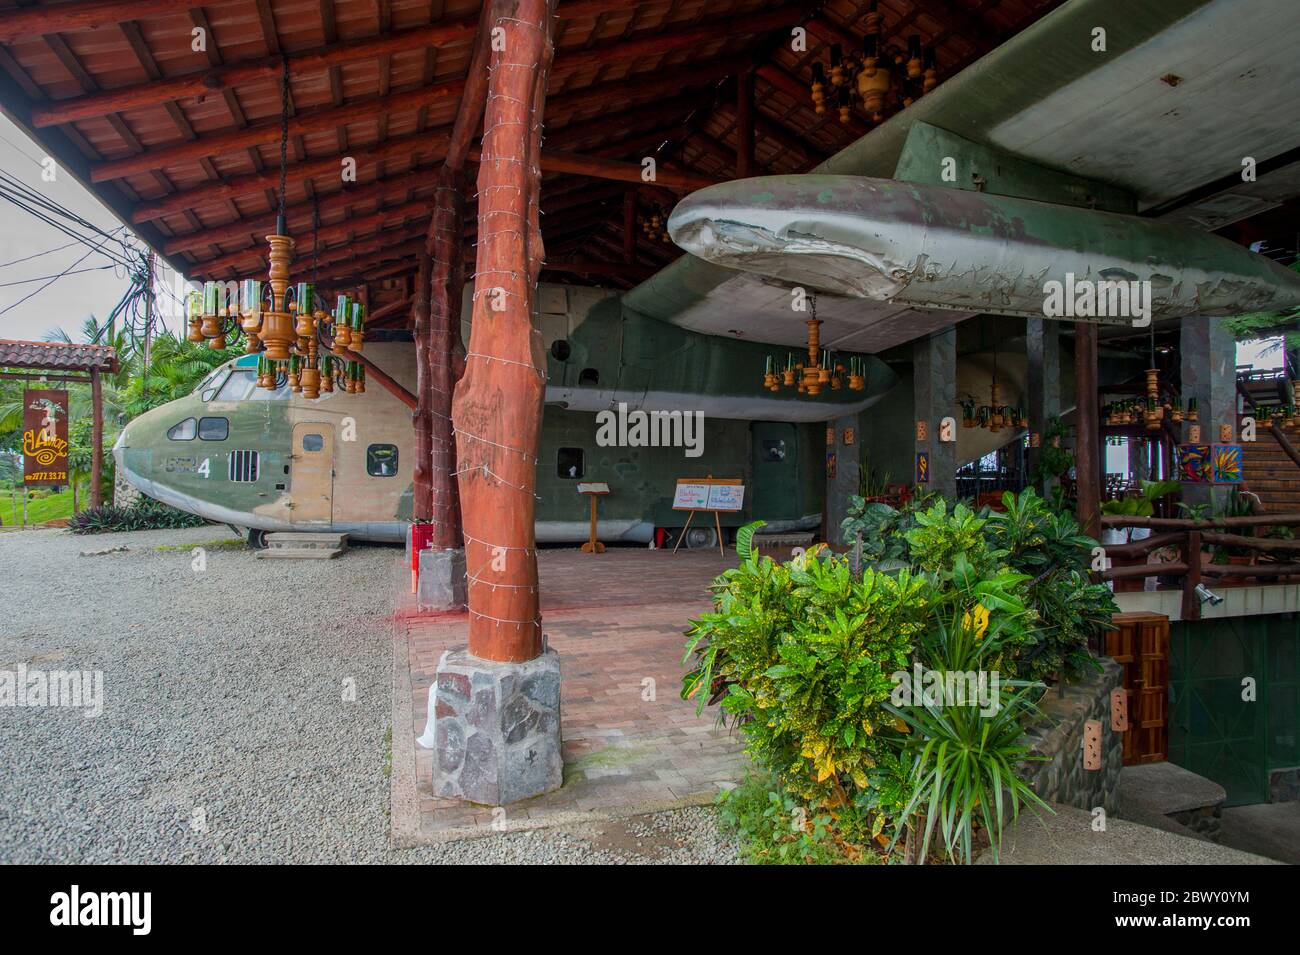 A retired Fairchild C-123 Provider (an American military transport aircraft) is being used in the design of a restaurant in Quepos in Costa Rica. Stock Photo